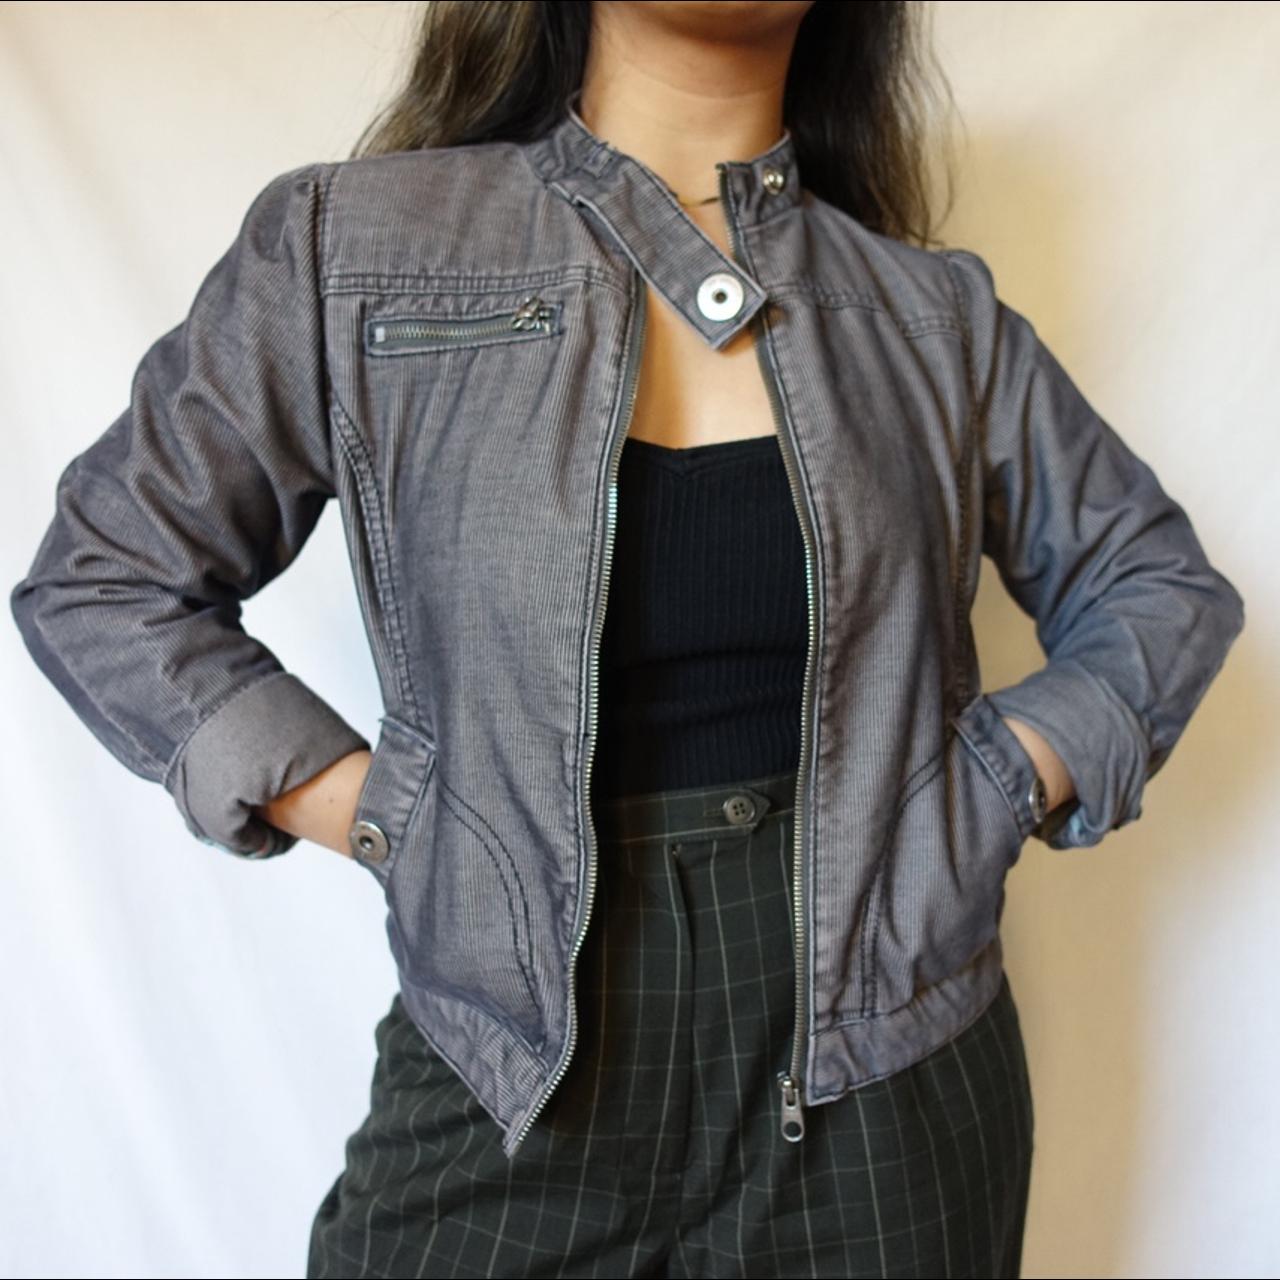 American Vintage Women's Grey and Silver Jacket (2)